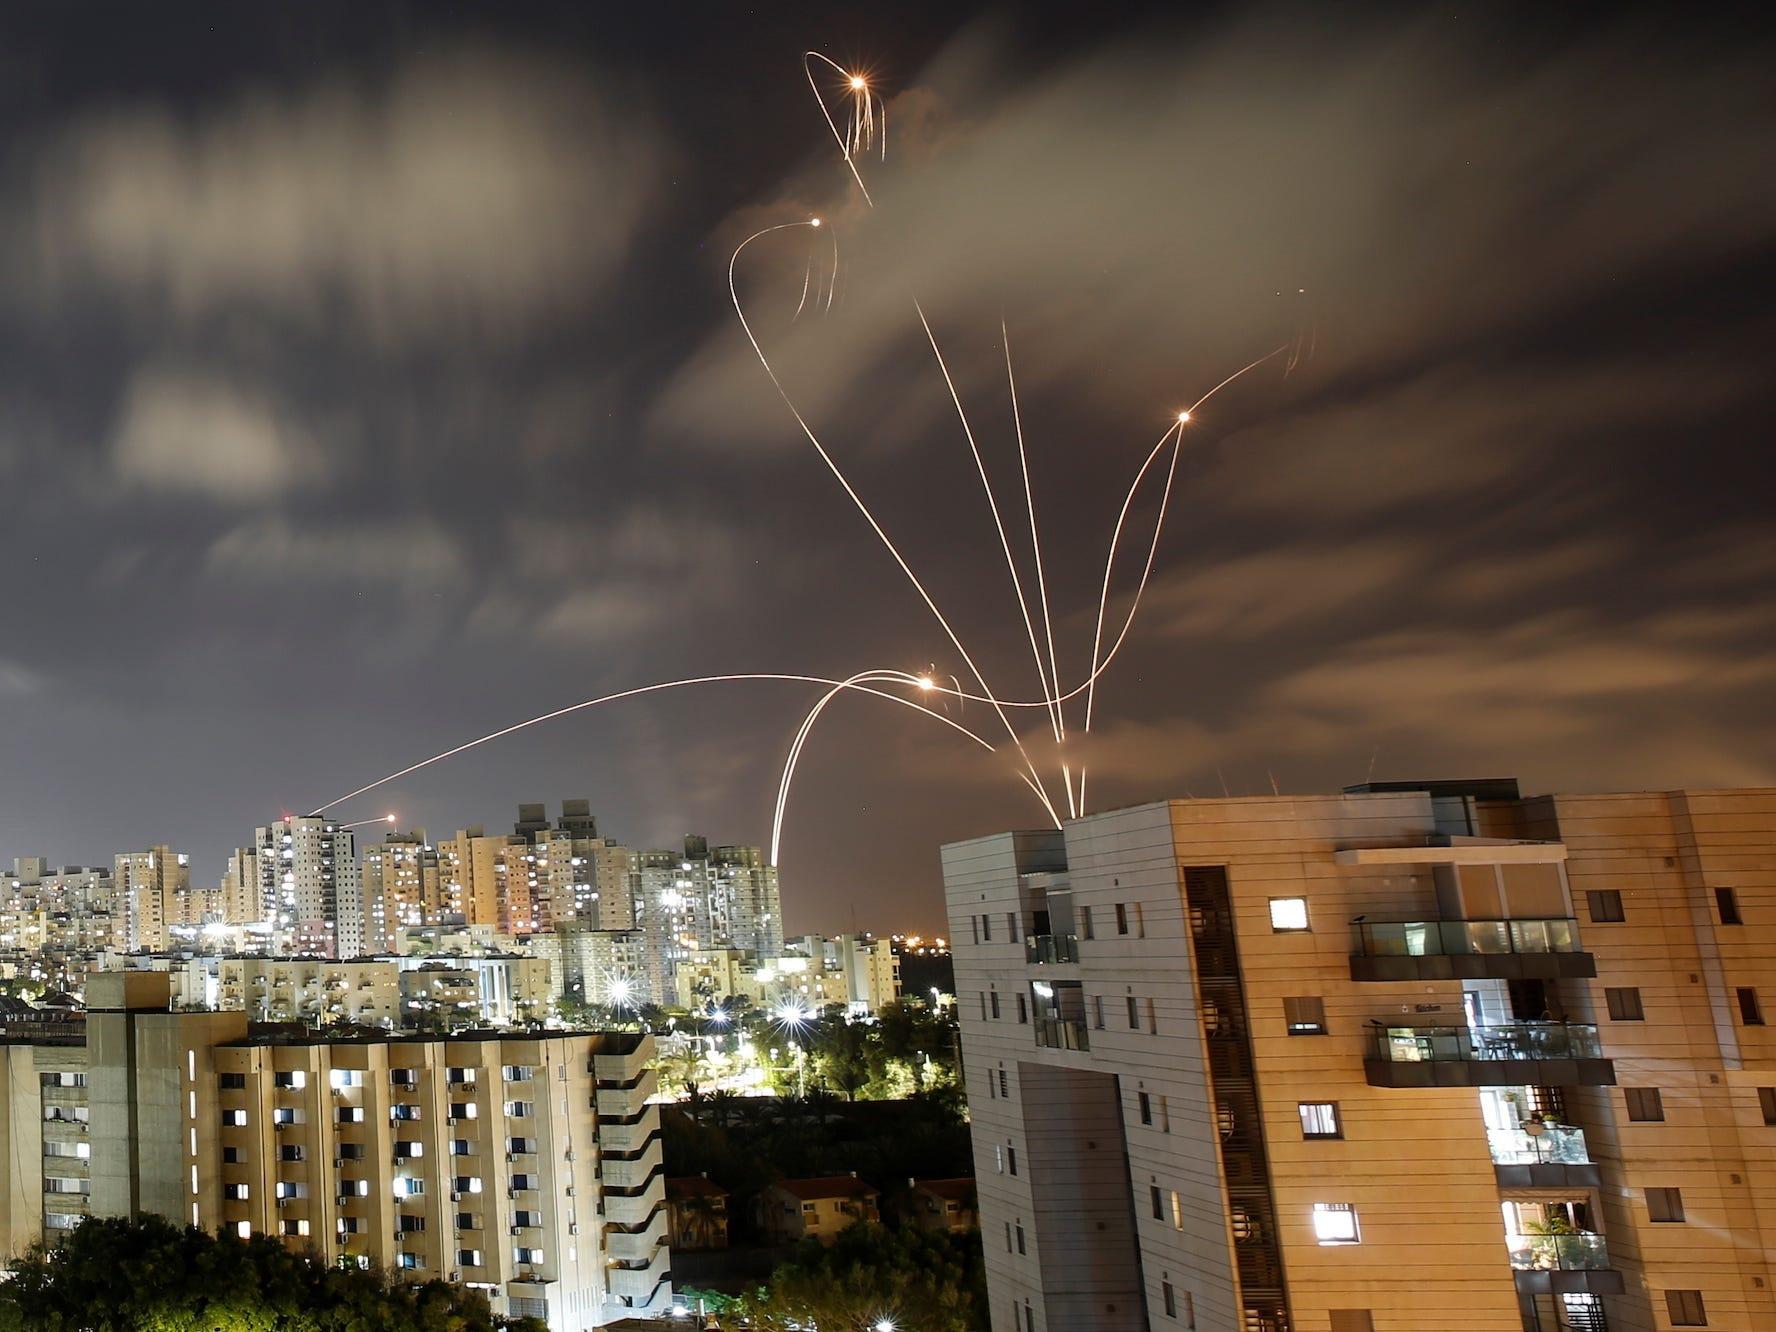 Israel's Iron Dome has blocked some 90% of rockets fired by Hamas ...